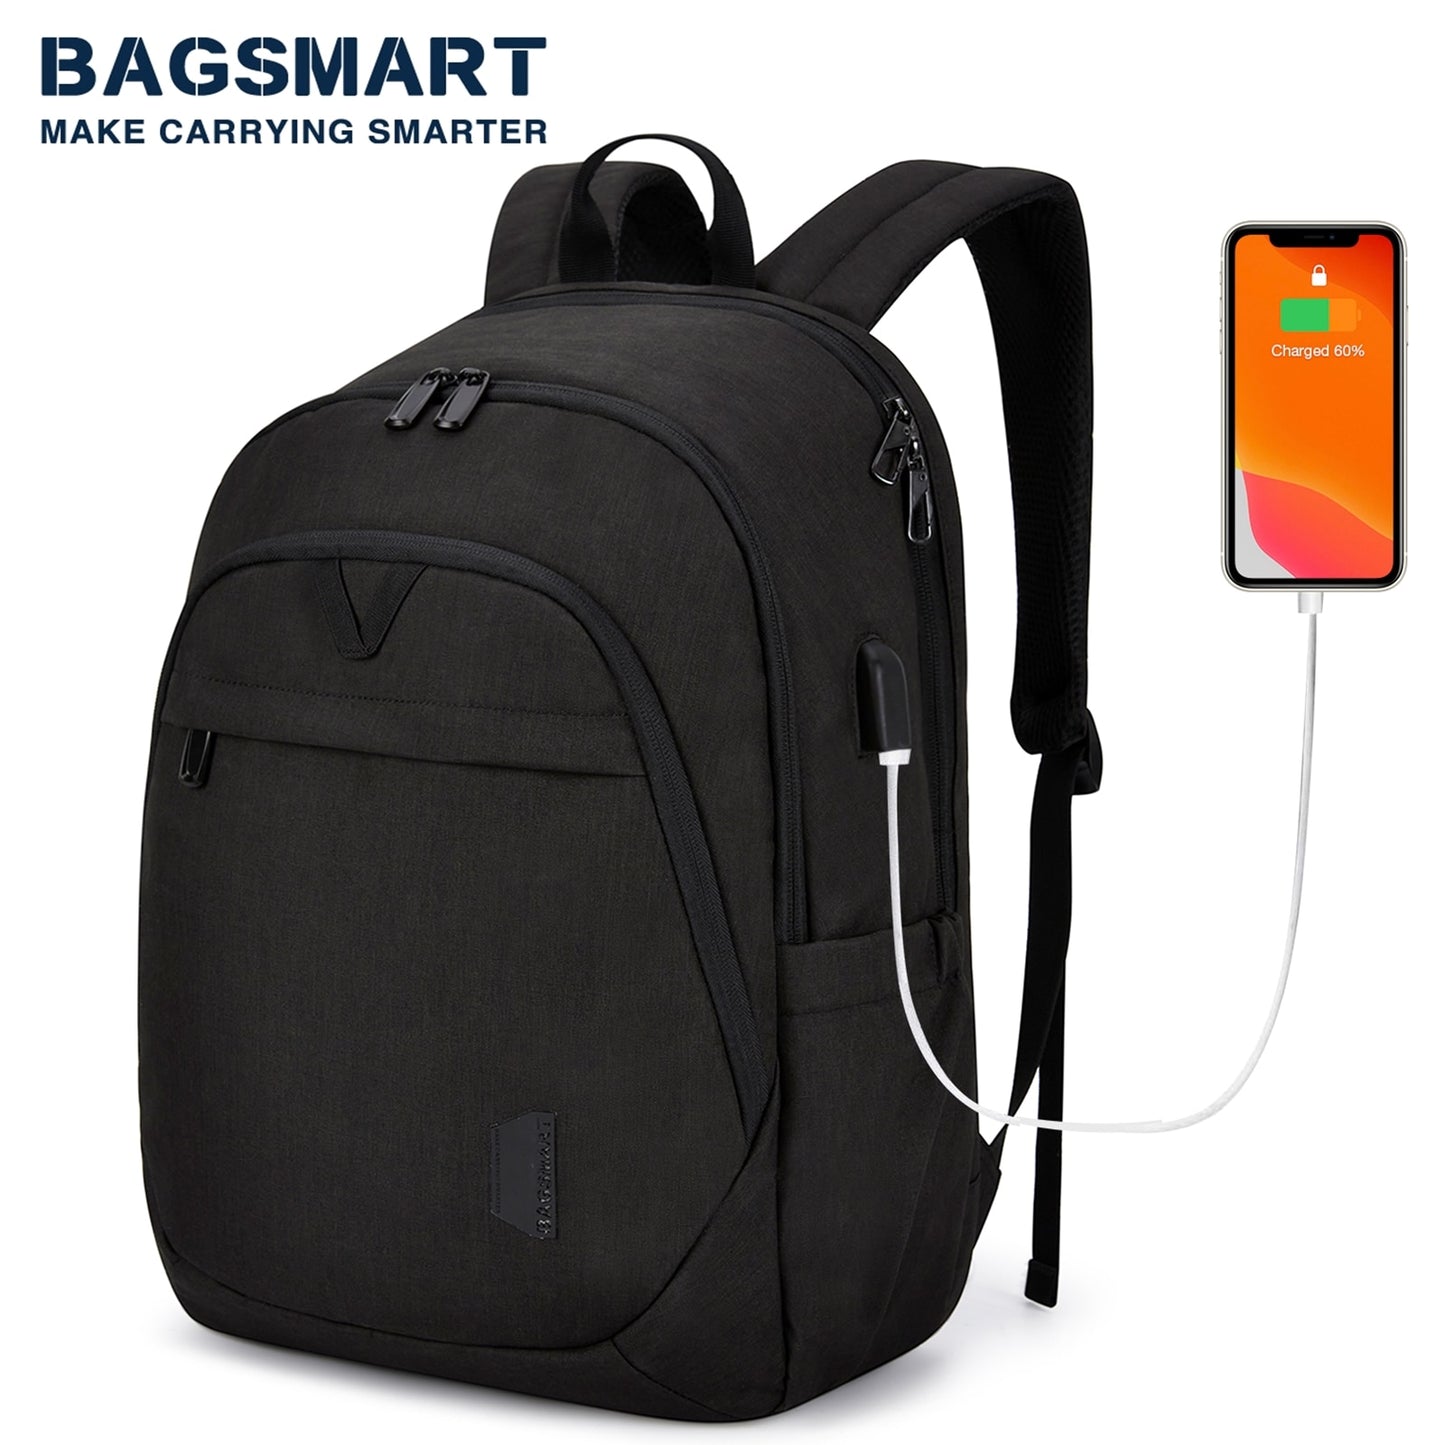 BAGSMART Women's Backpack Anti-theft Large Waterproof College Schollbag Travel Bussiness Laptop Backpacks with USB Charging Port